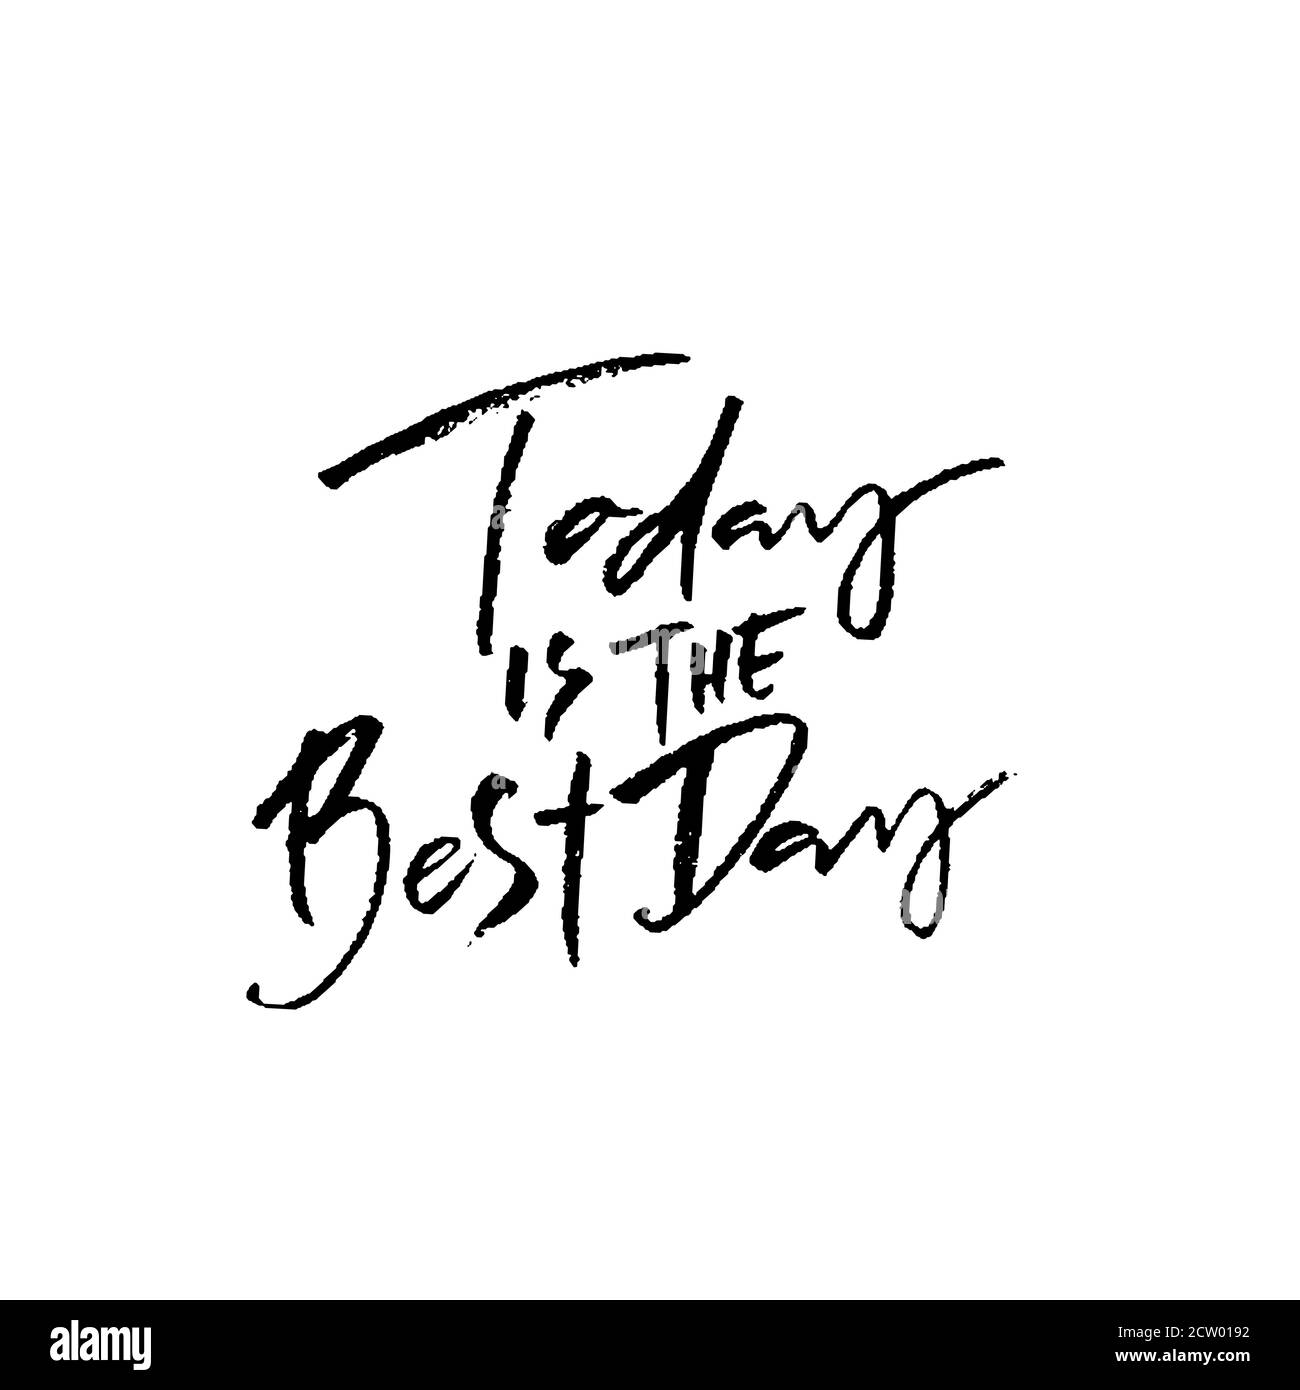 Today is the best day. Hand drawn modern brush lettering. Typography banner. Ink vector illustration. Stock Vector